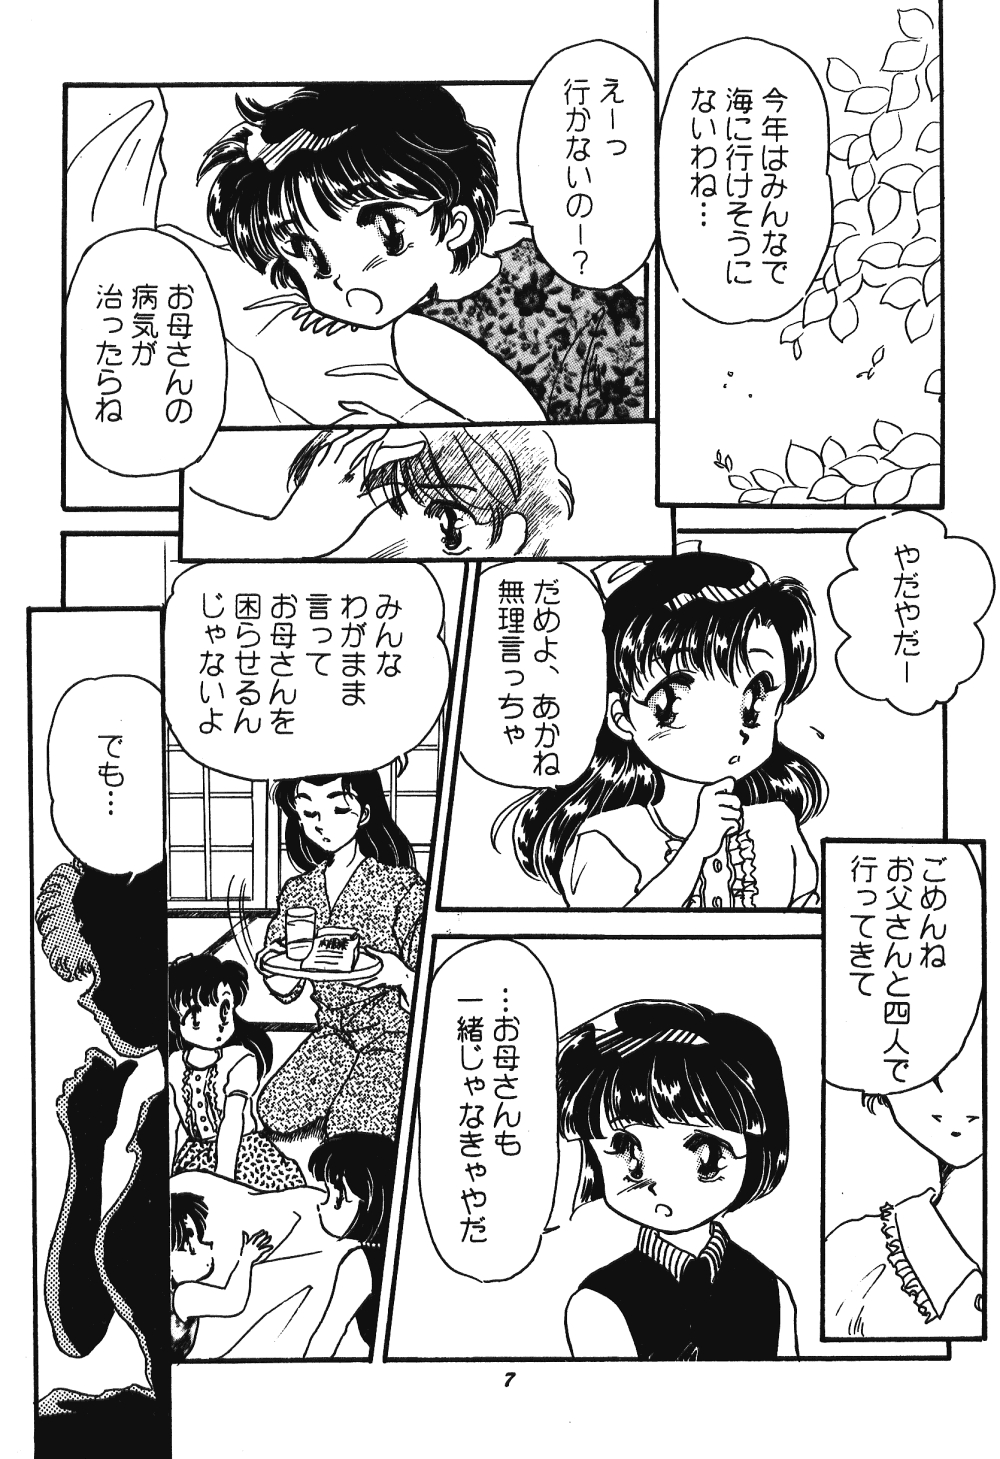 Never Forget Summer (Ranma 1/2) 5